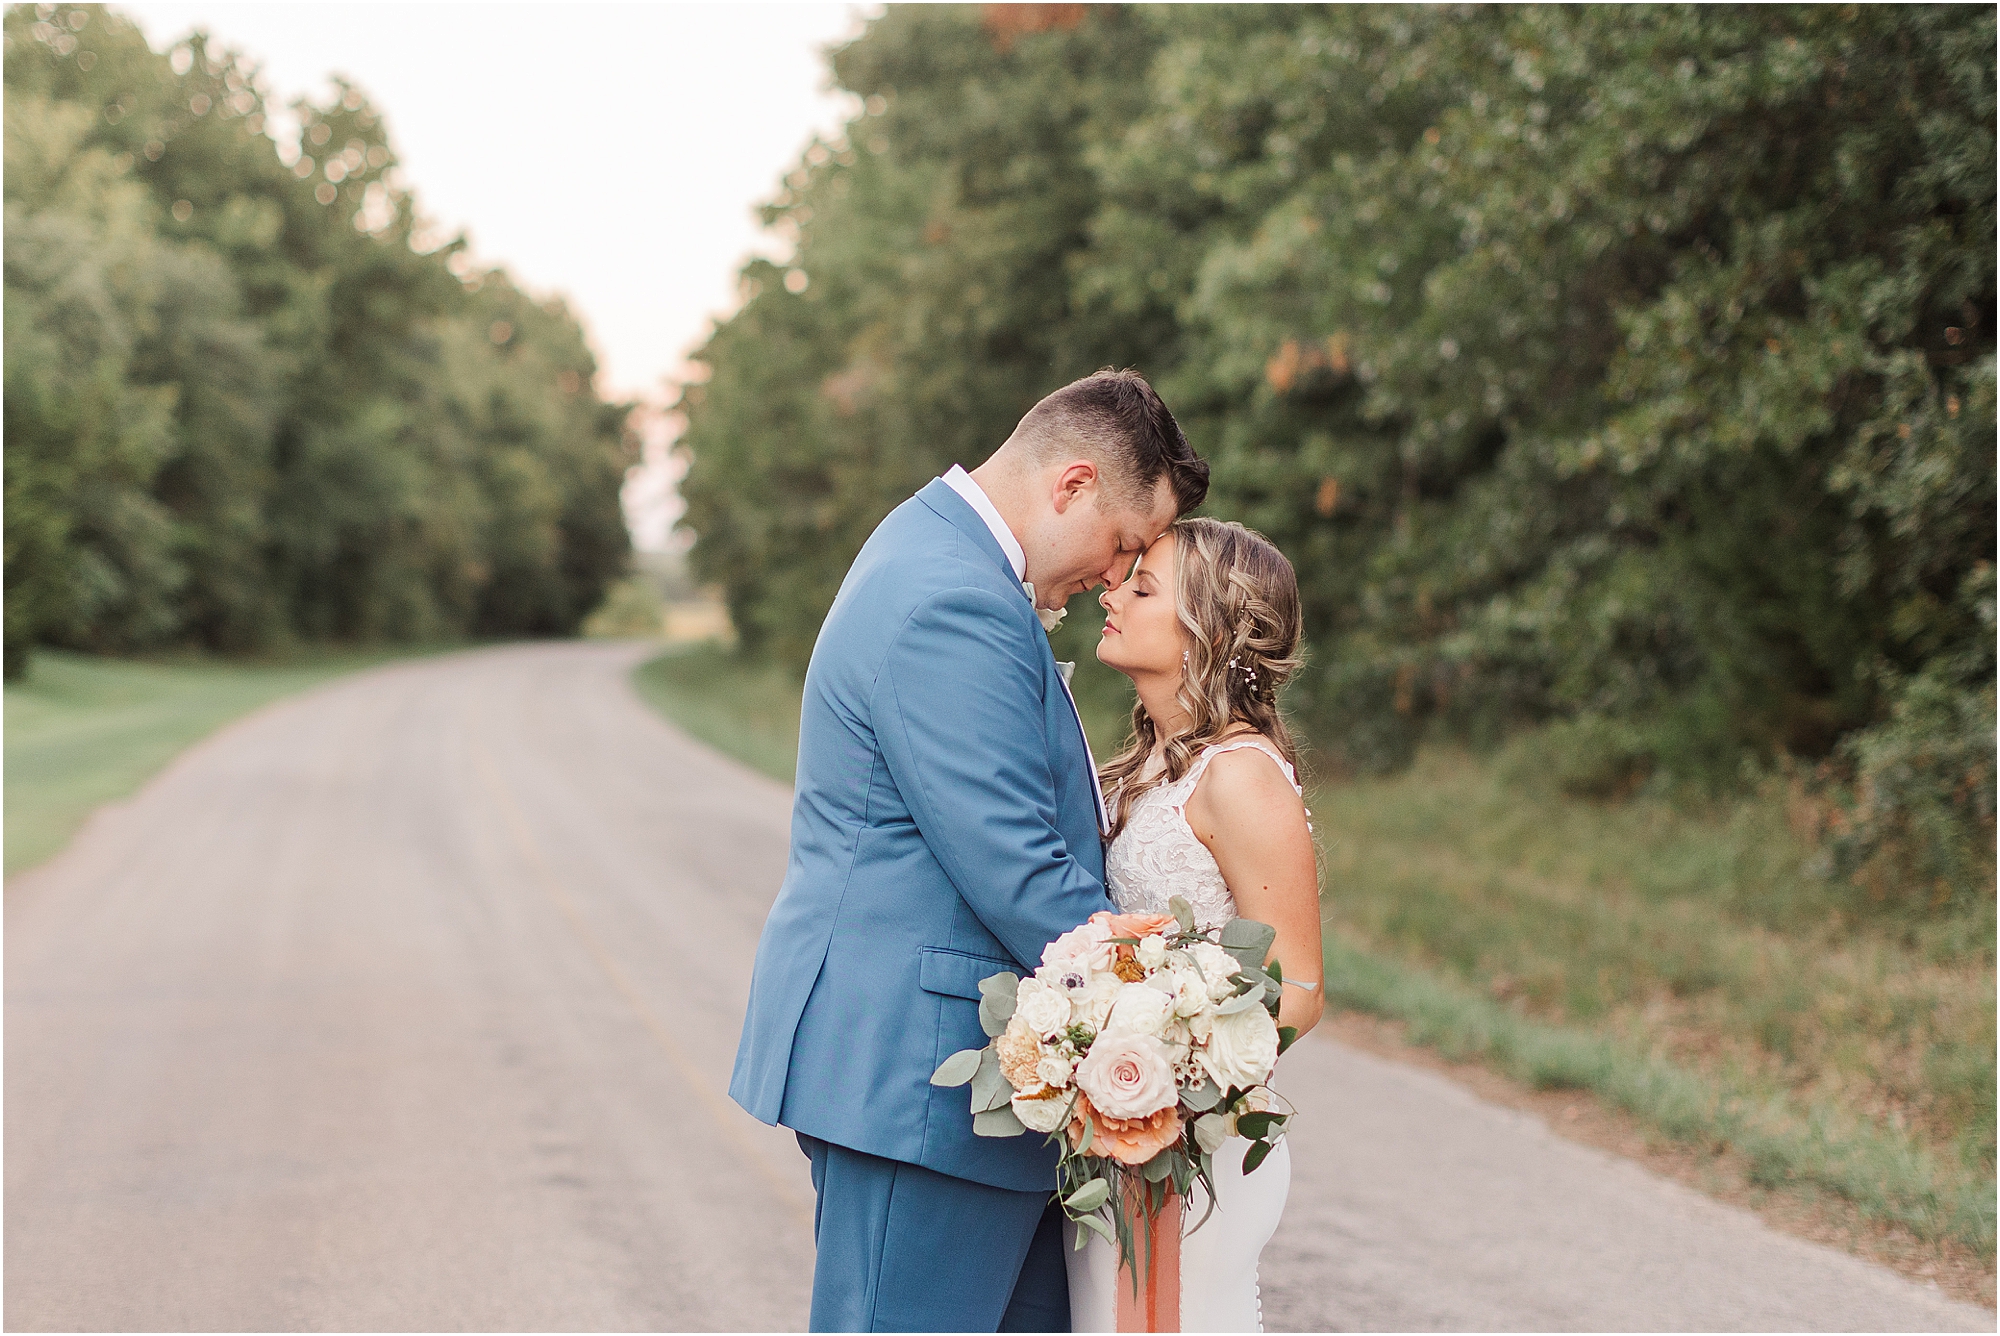 Caitlin and Riley sharing a moment on a country road in the woods of Oklahoma at their wedding venue Eleven Oaks Ranch.